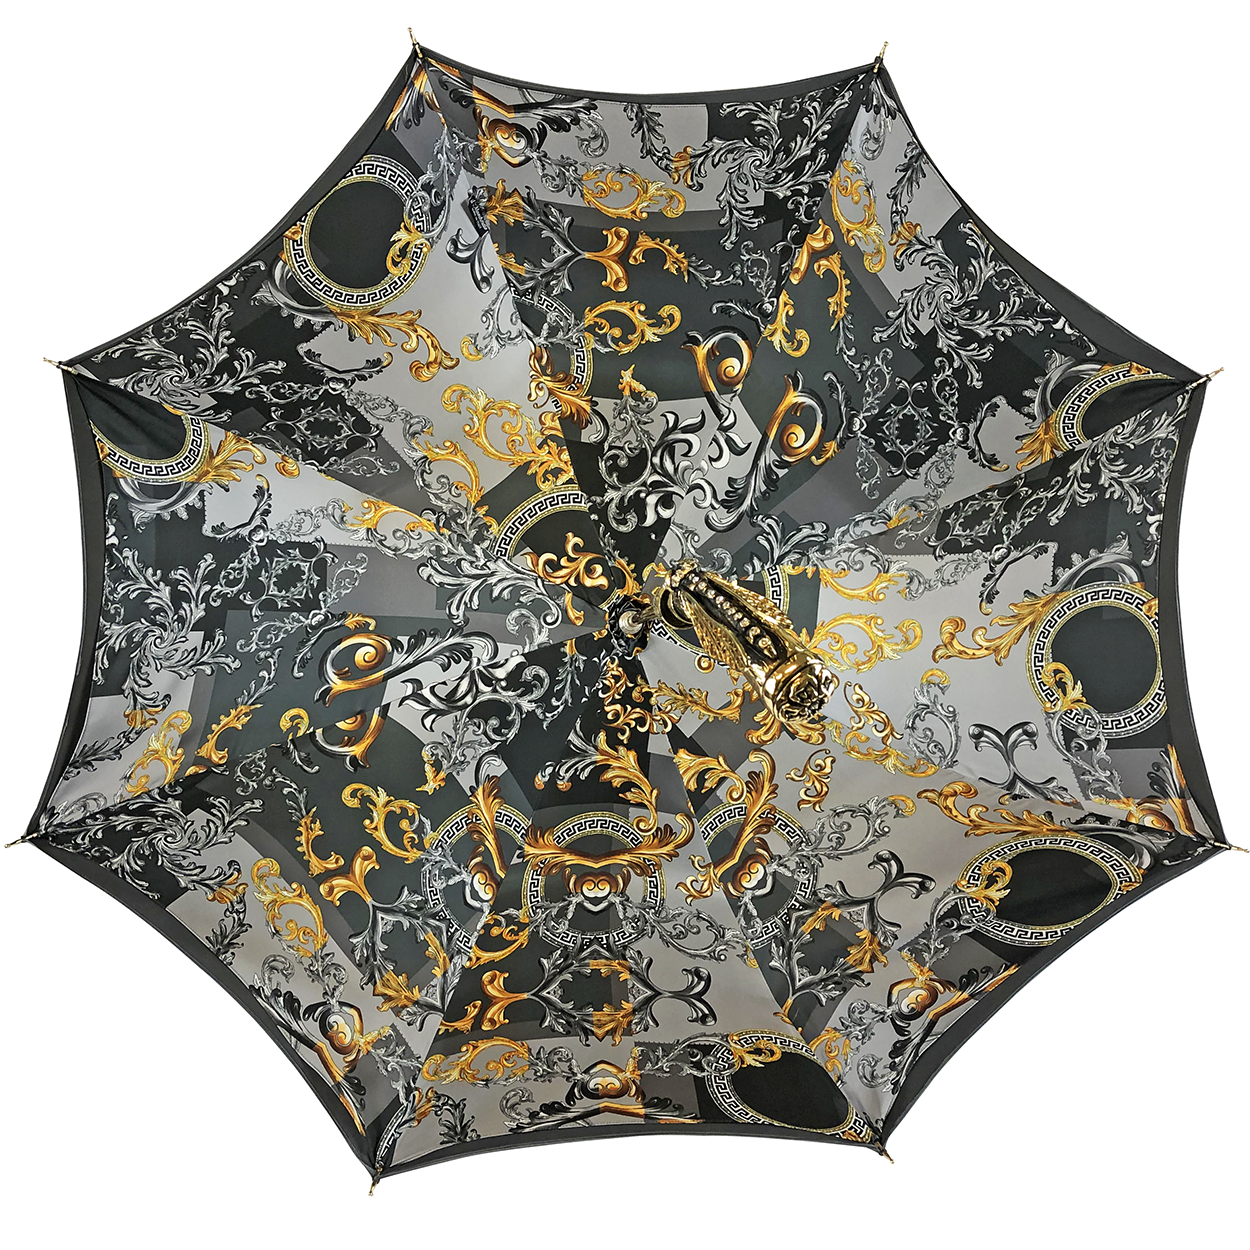 Elegant handcrafted umbrella with dragonfly